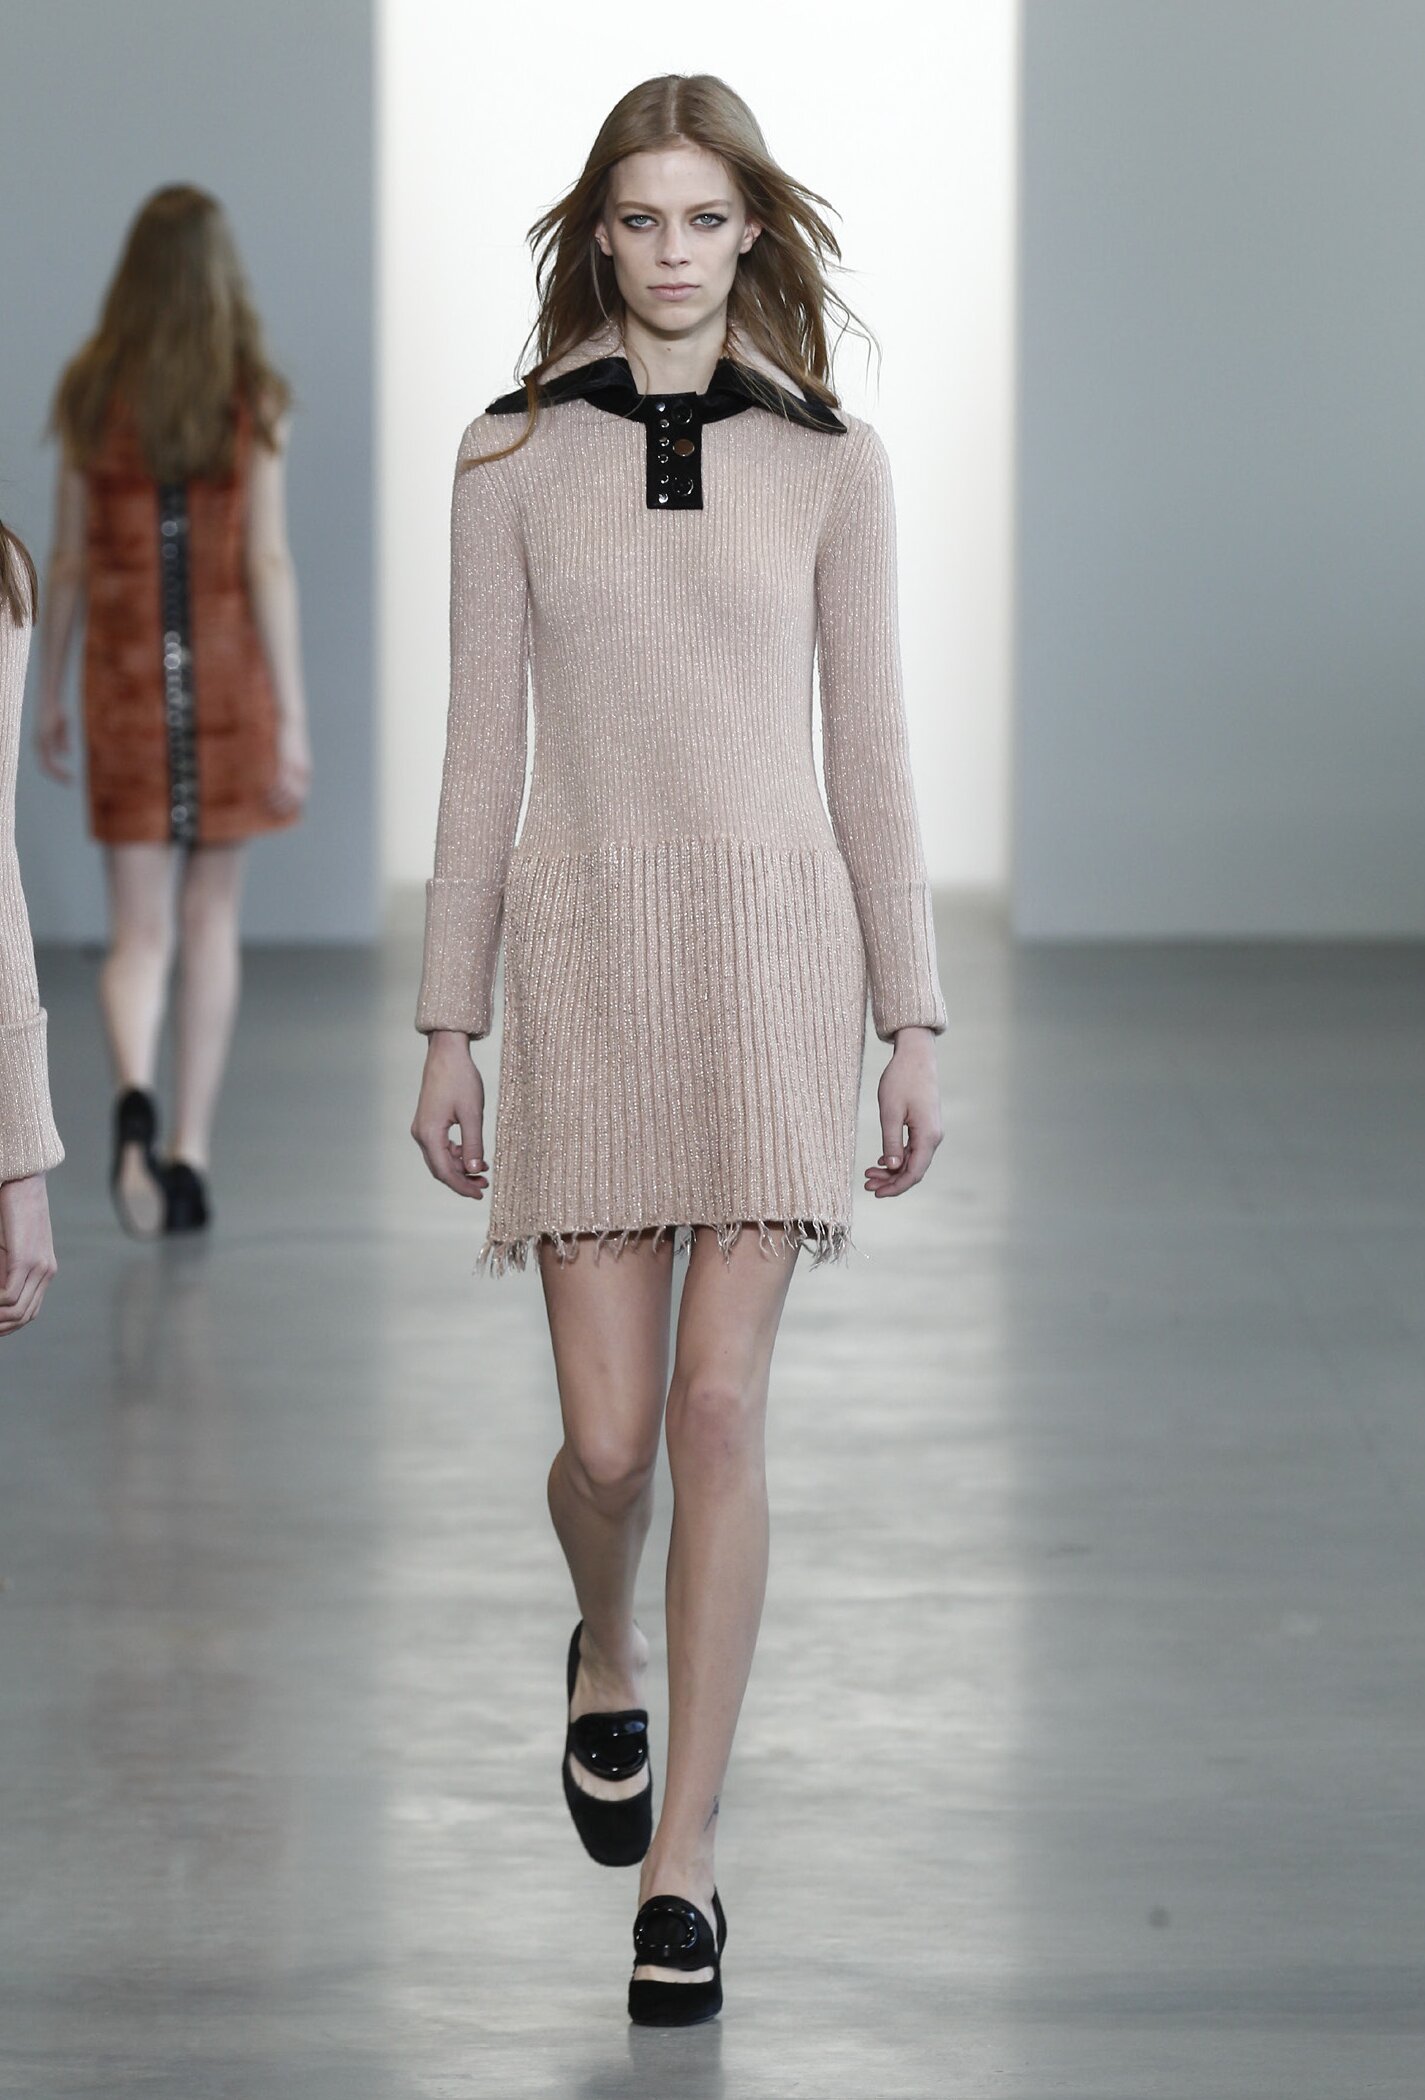 CALVIN KLEIN COLLECTION WOMEN’S FALL 2015 | The Skinny Beep